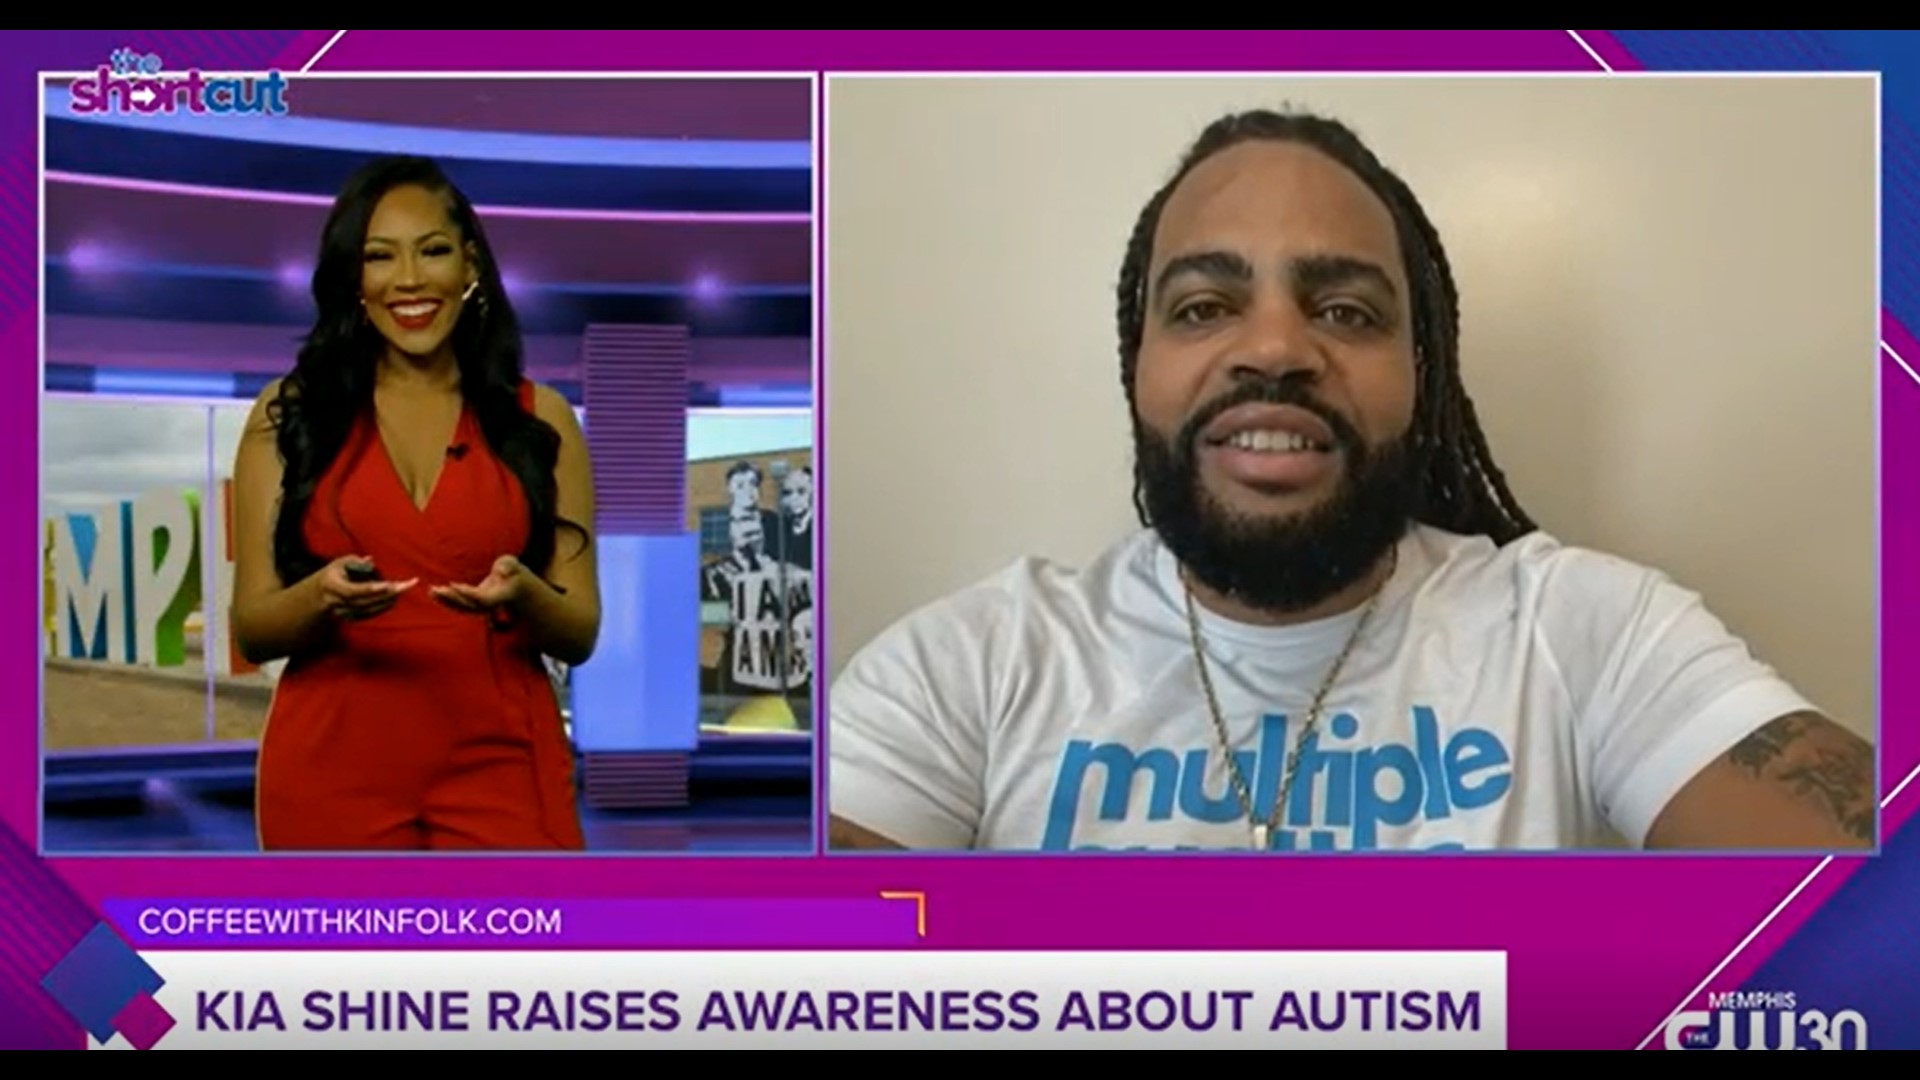 Ever wanted to learn more about autism, but are too afraid to ask? In that case, check out what Memphis rapper and father Kia Shine has to say about it!